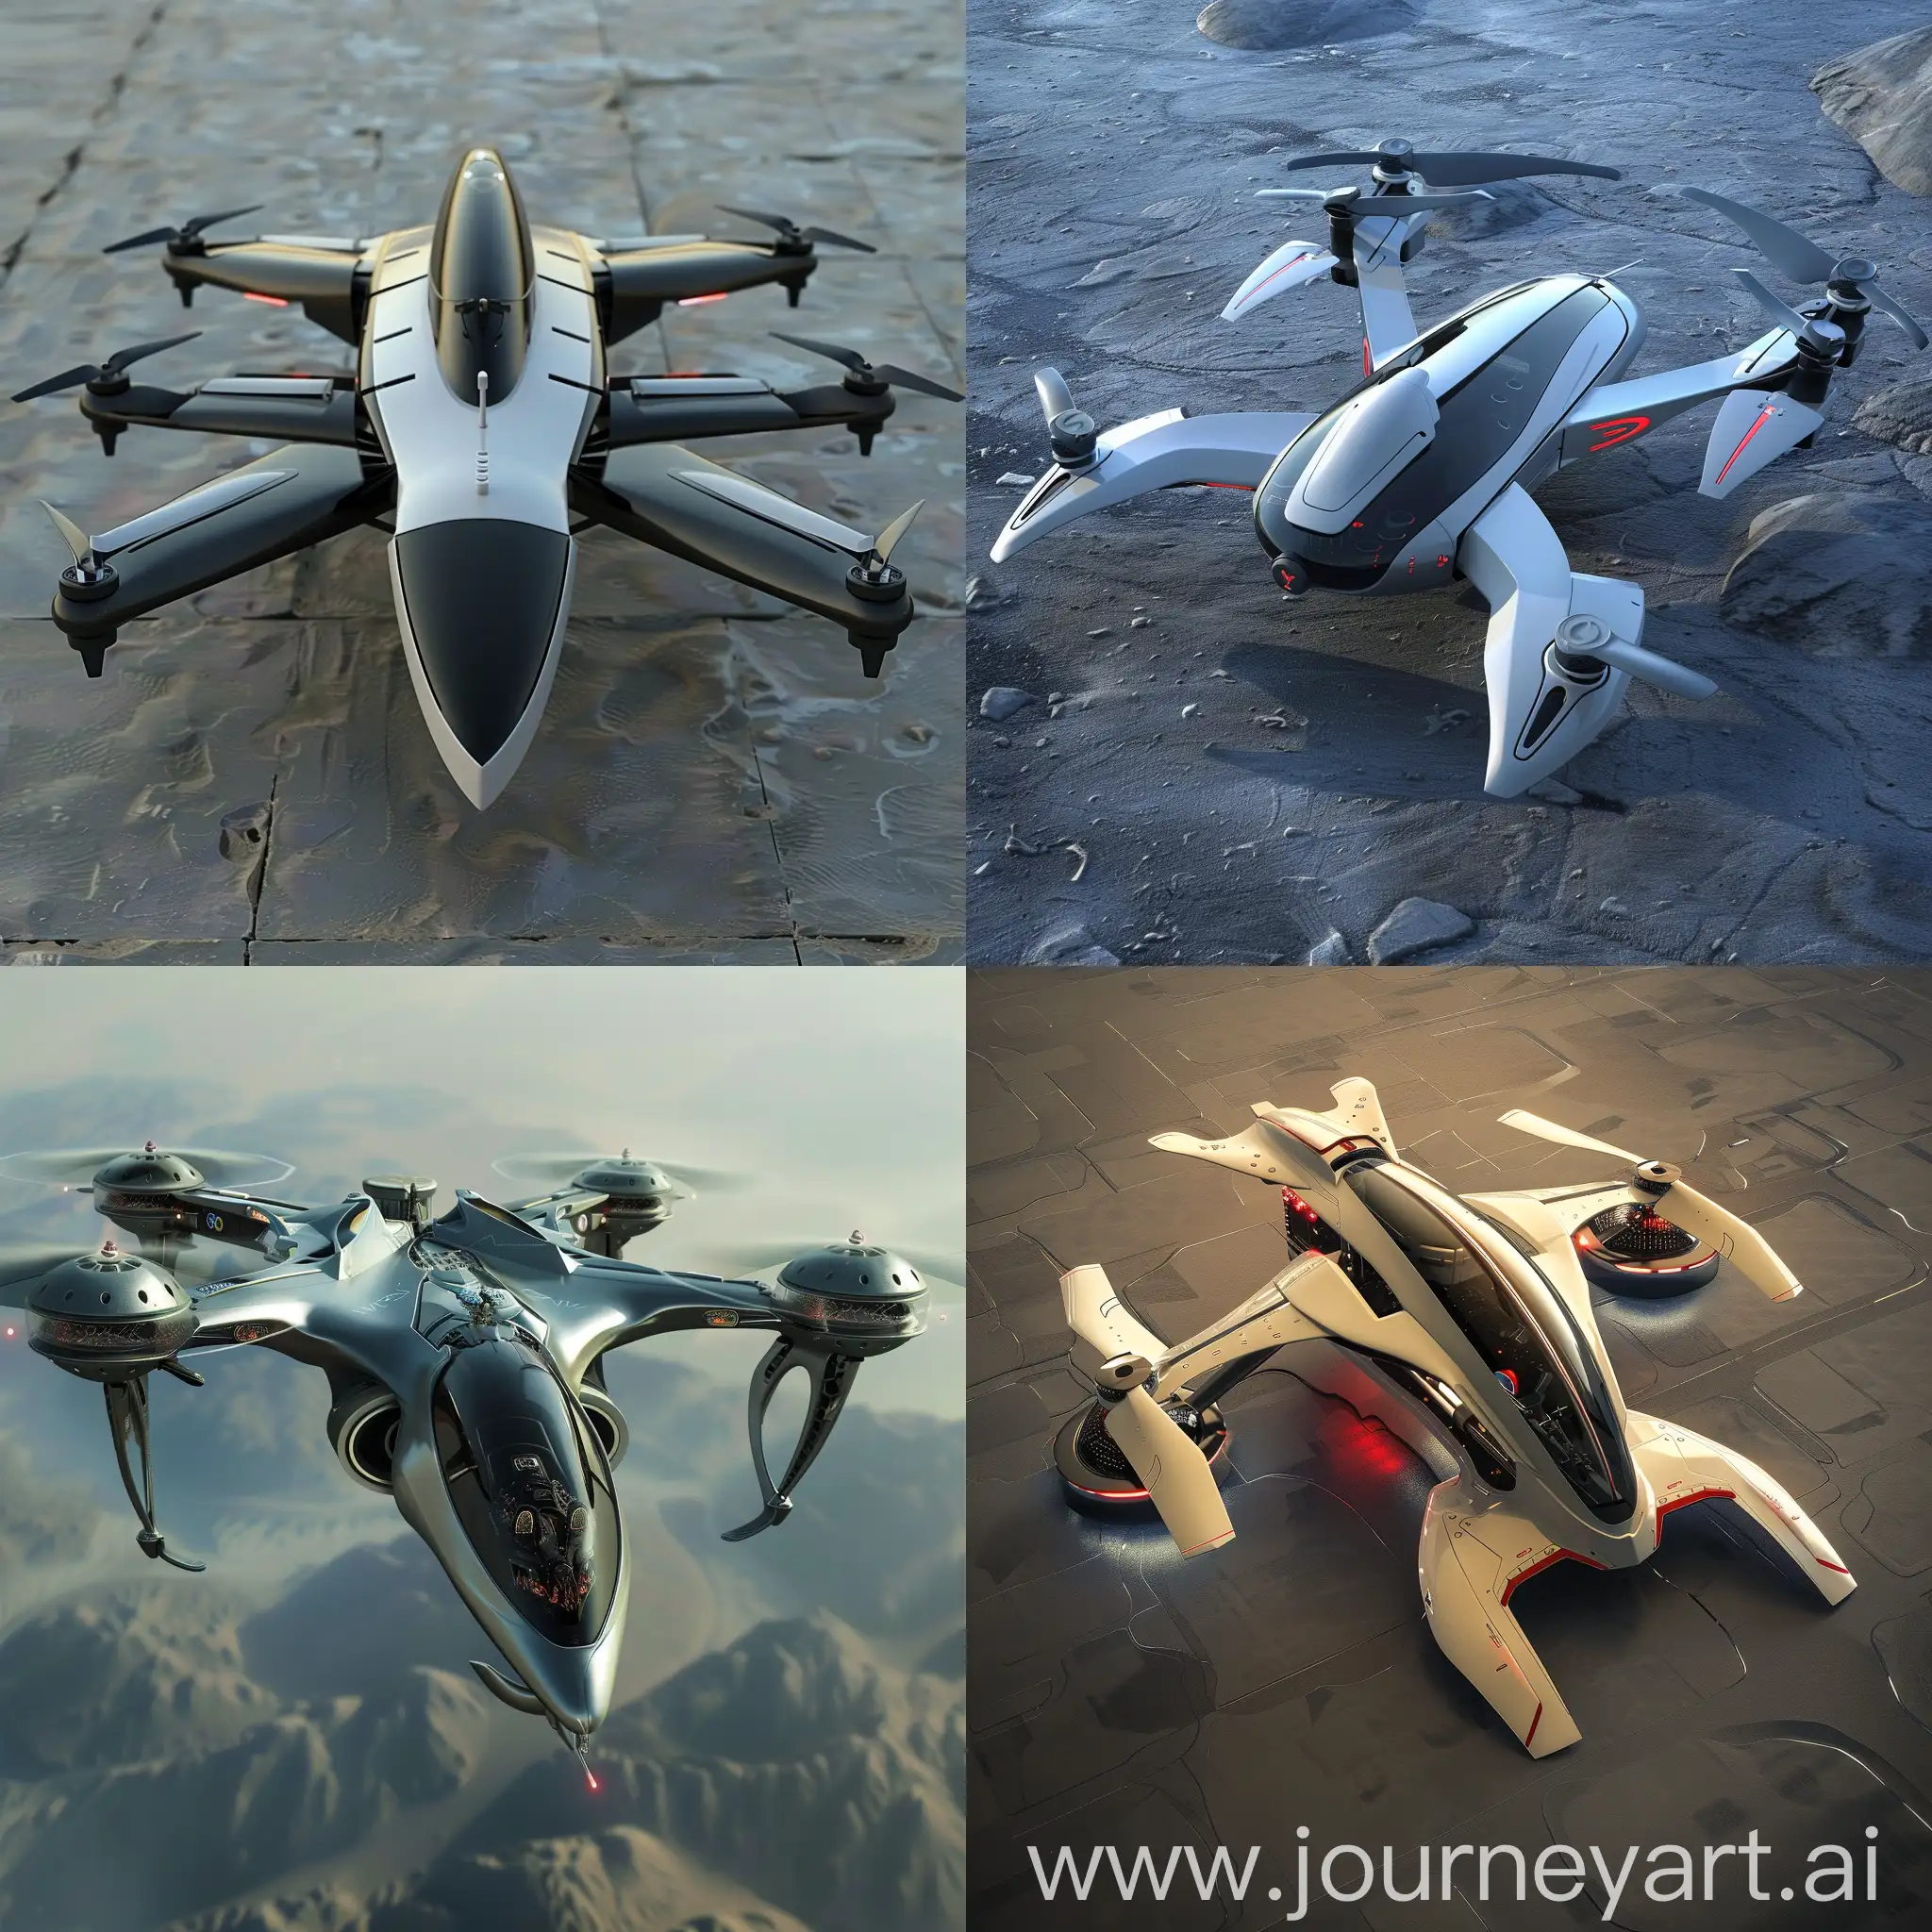 Futuristic-Drone-Technology-in-Action